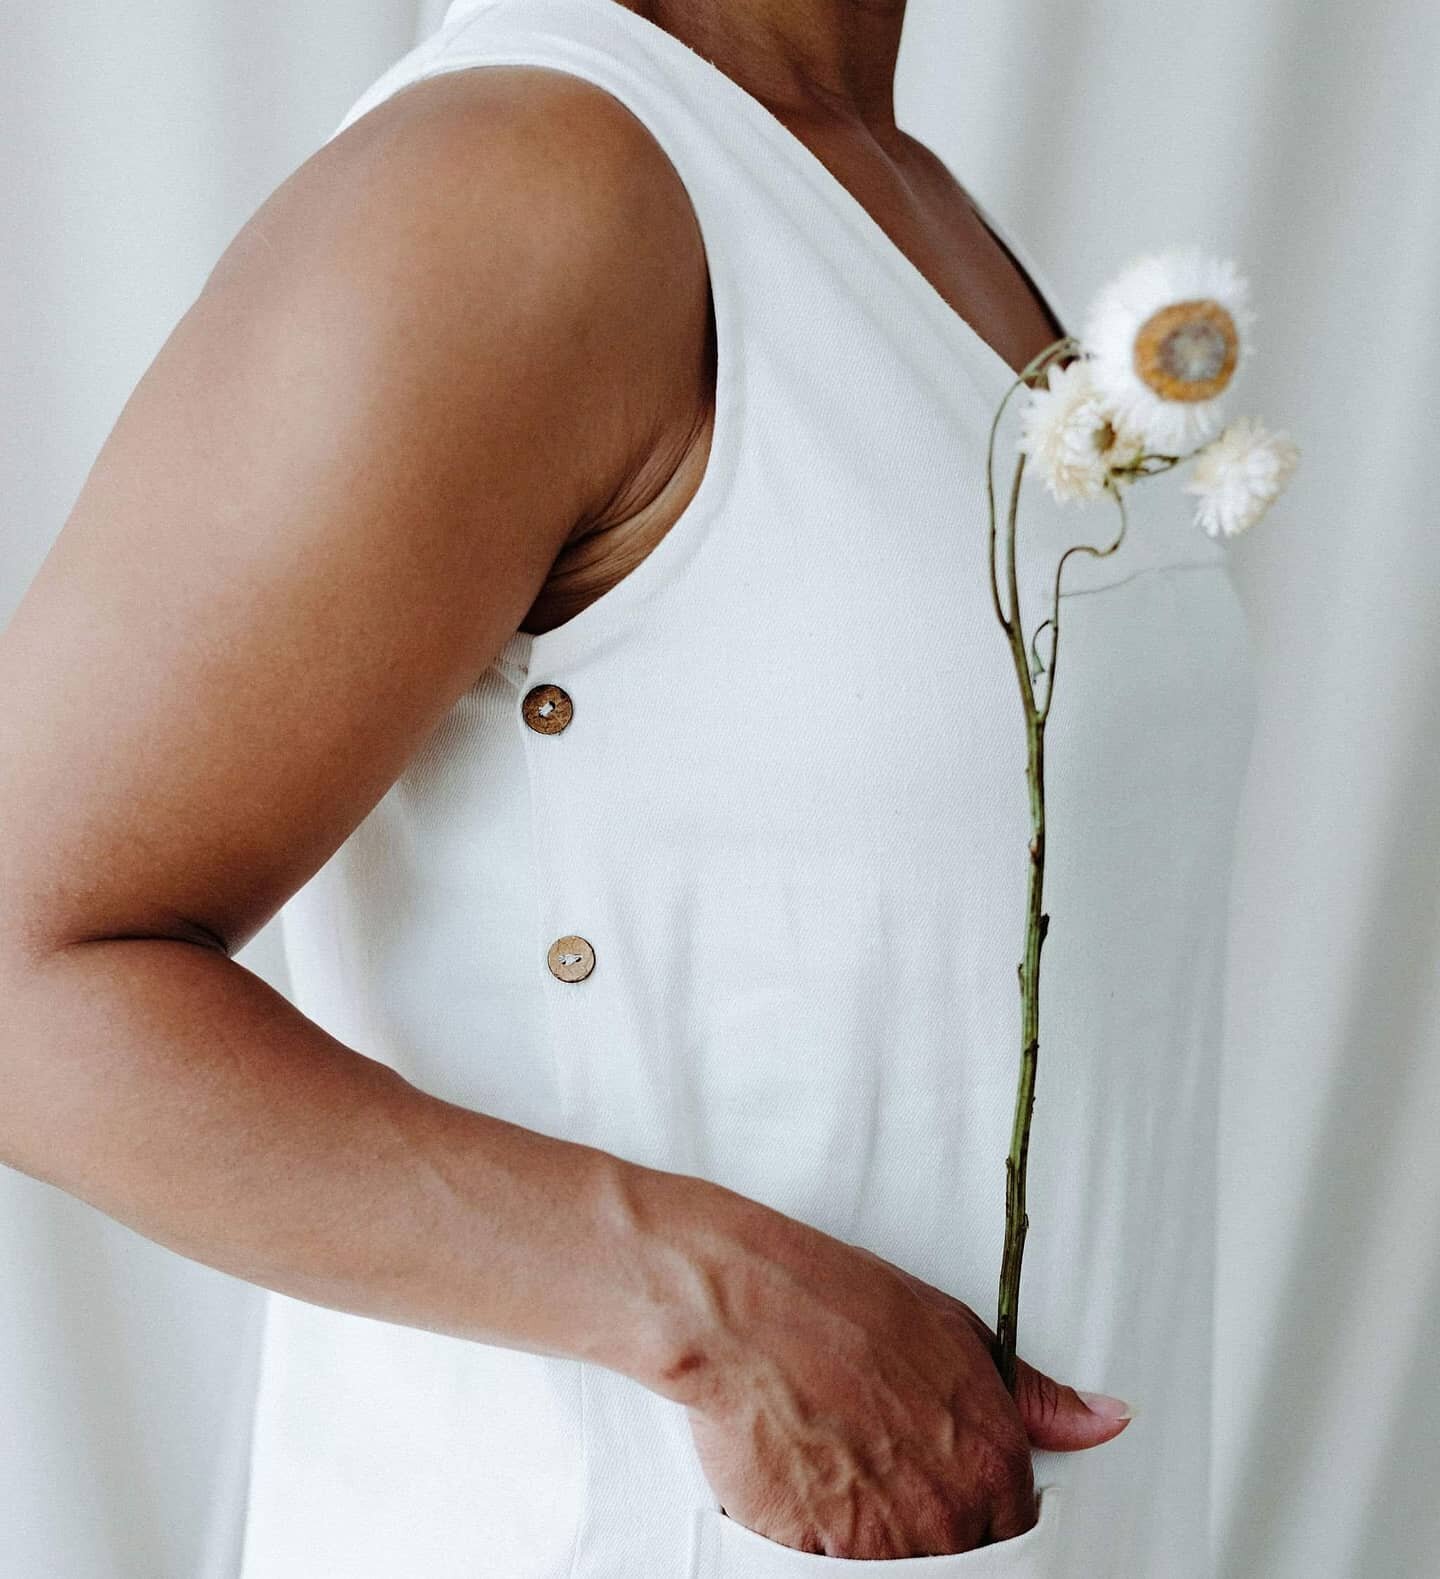 &quot;I have a 6 week old baby and am breastfeeding around the clock. This dress makes me feel beautiful and put together every when I have only slept in 2 hour increments.&quot;

When we received this words, our hearts expanded, this is the very rea